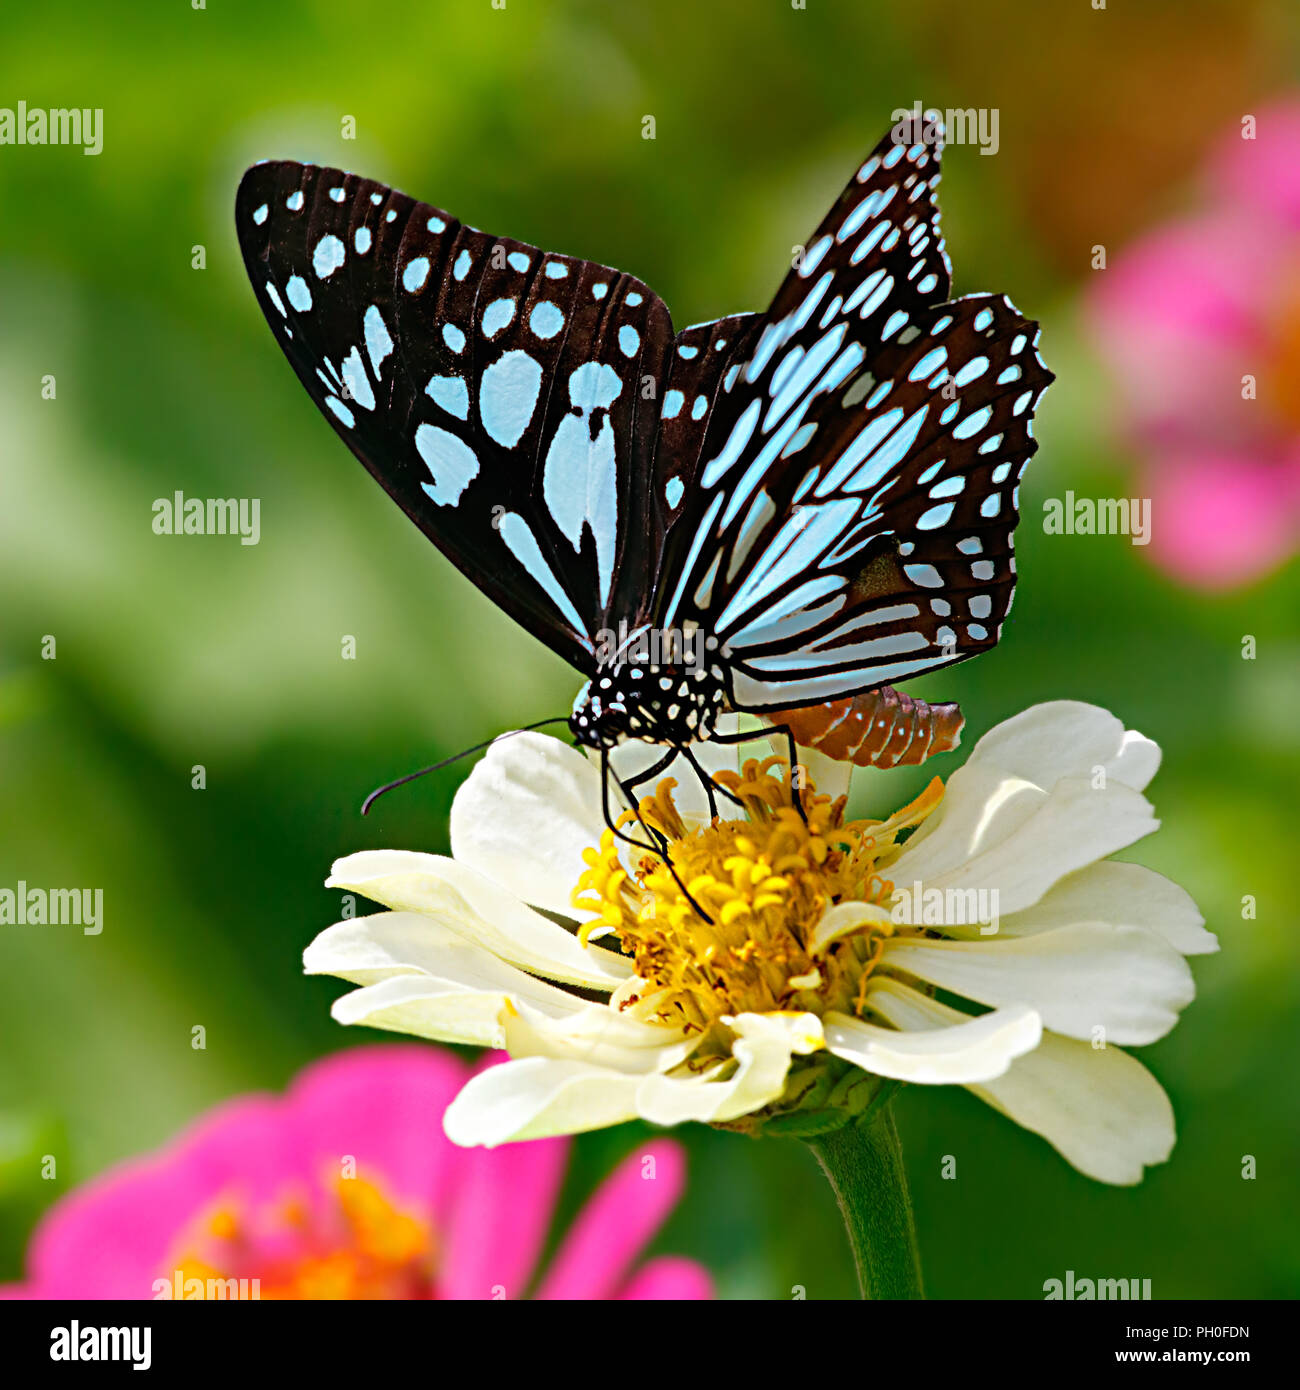 Blue tiger butterfly or Danaid Tirumala limniace on a white zinnia flower with green background and pink flowers in the background Stock Photo